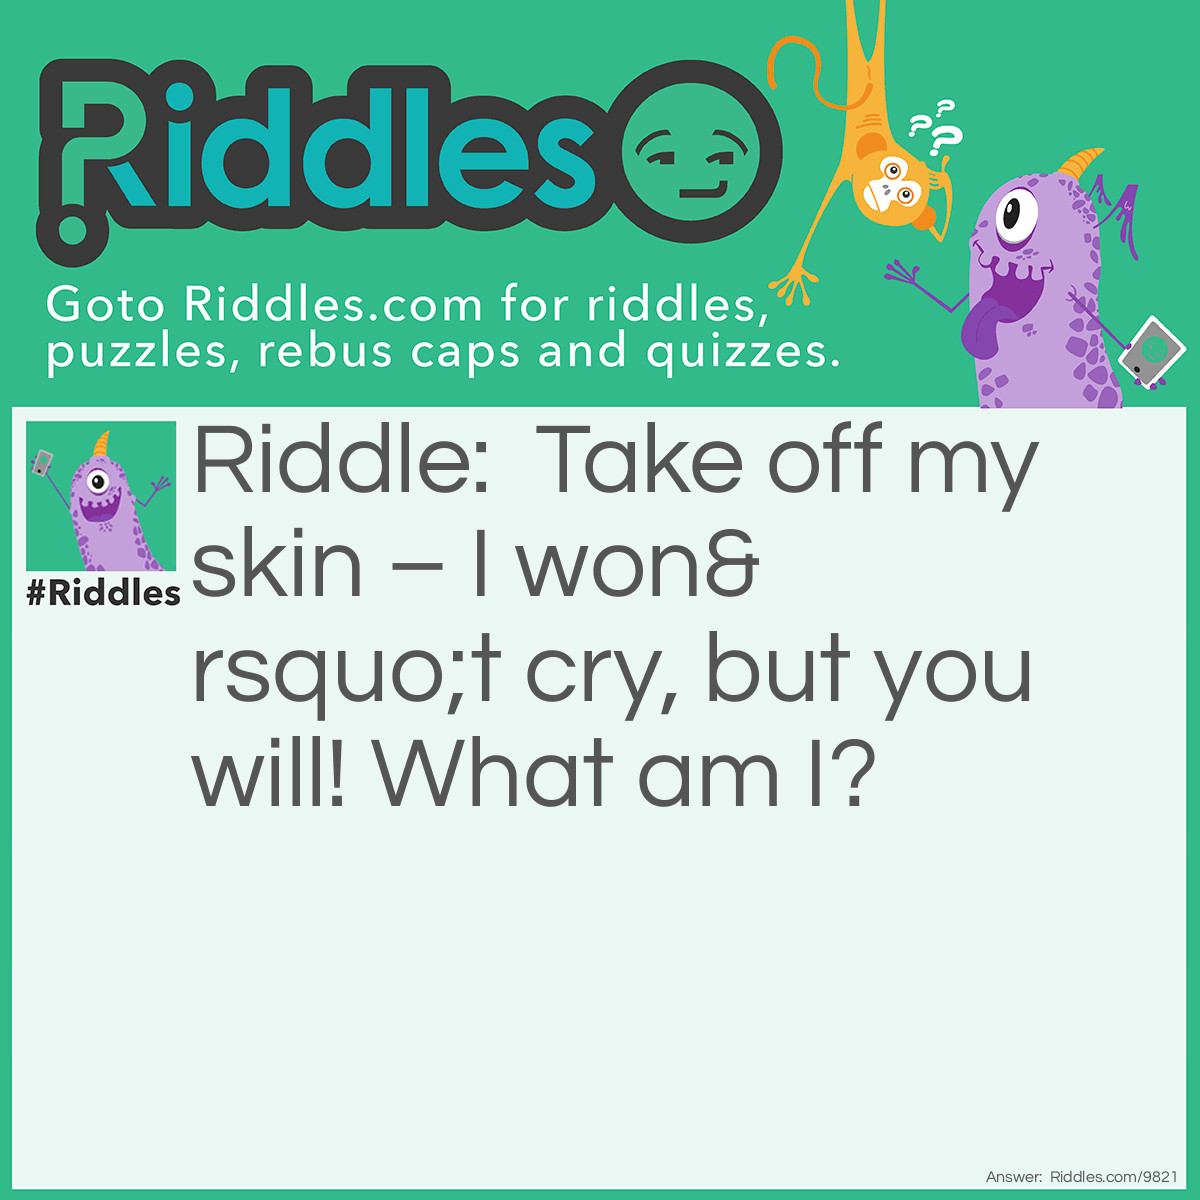 Riddle: Take off my skin - I won't cry, but you will! What am I? Answer: An Onion